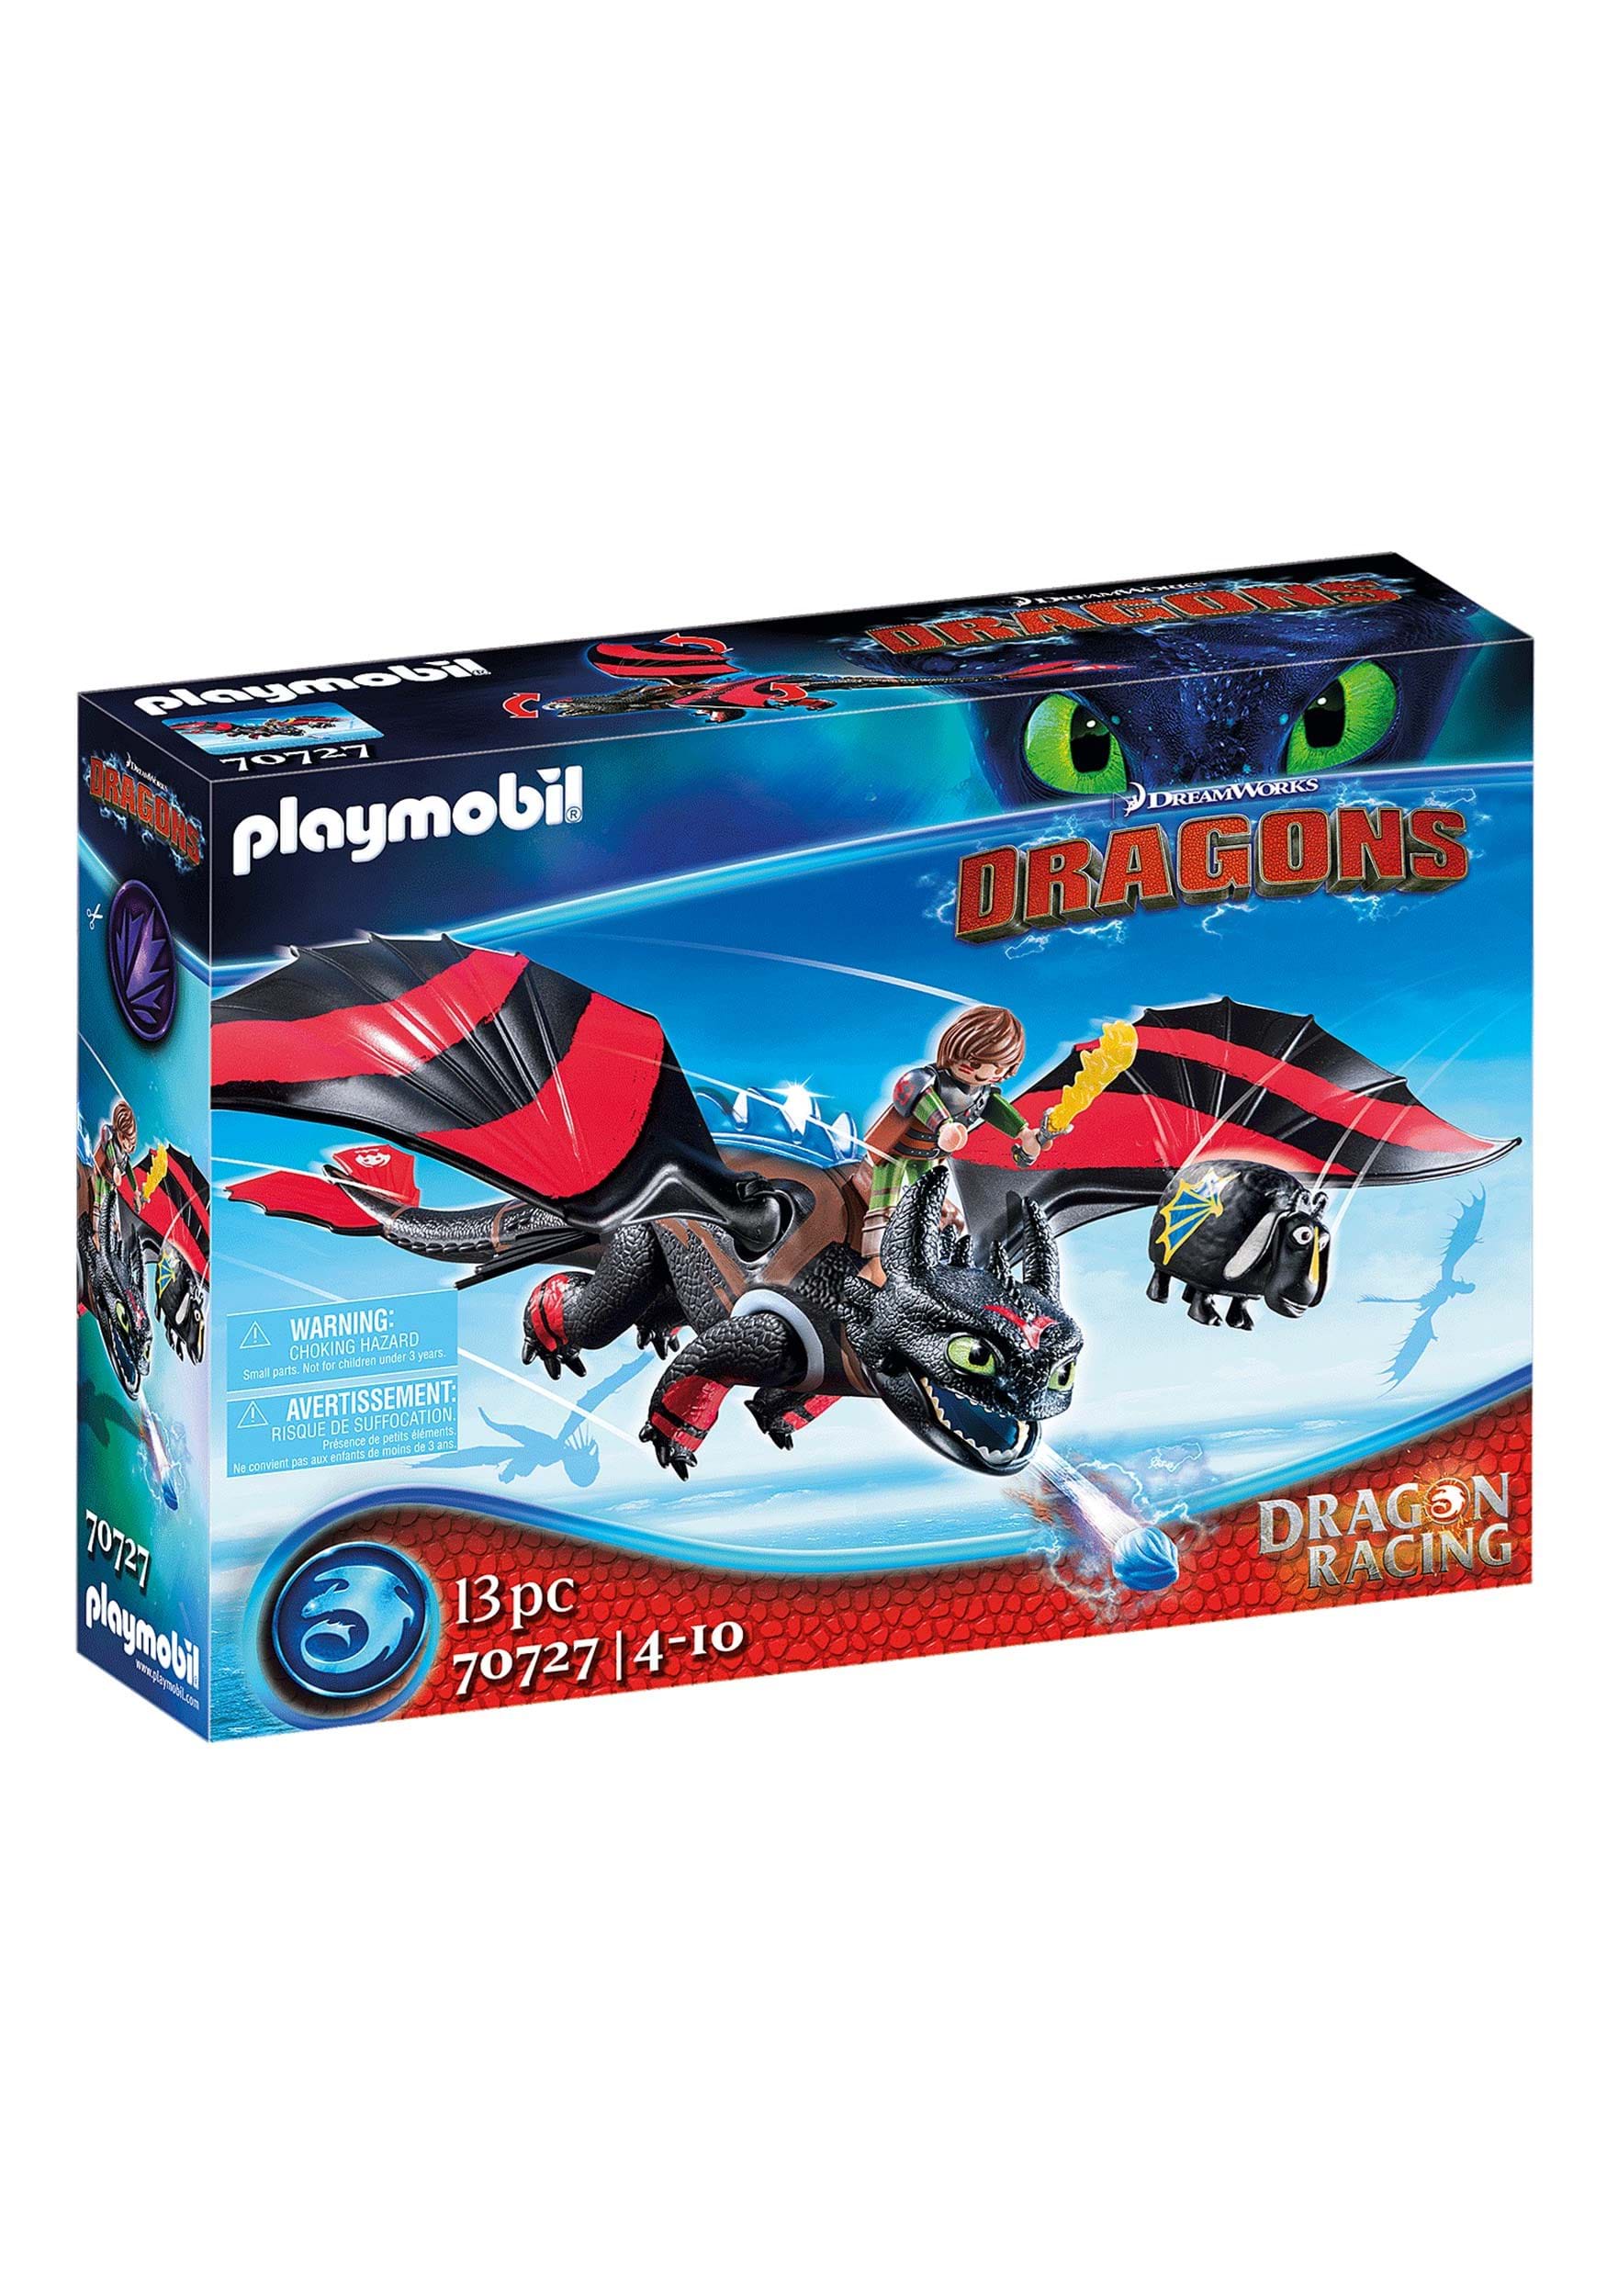 How to Train Your Dragon: Playmobil Dragon Racing- Hiccup and Toothless